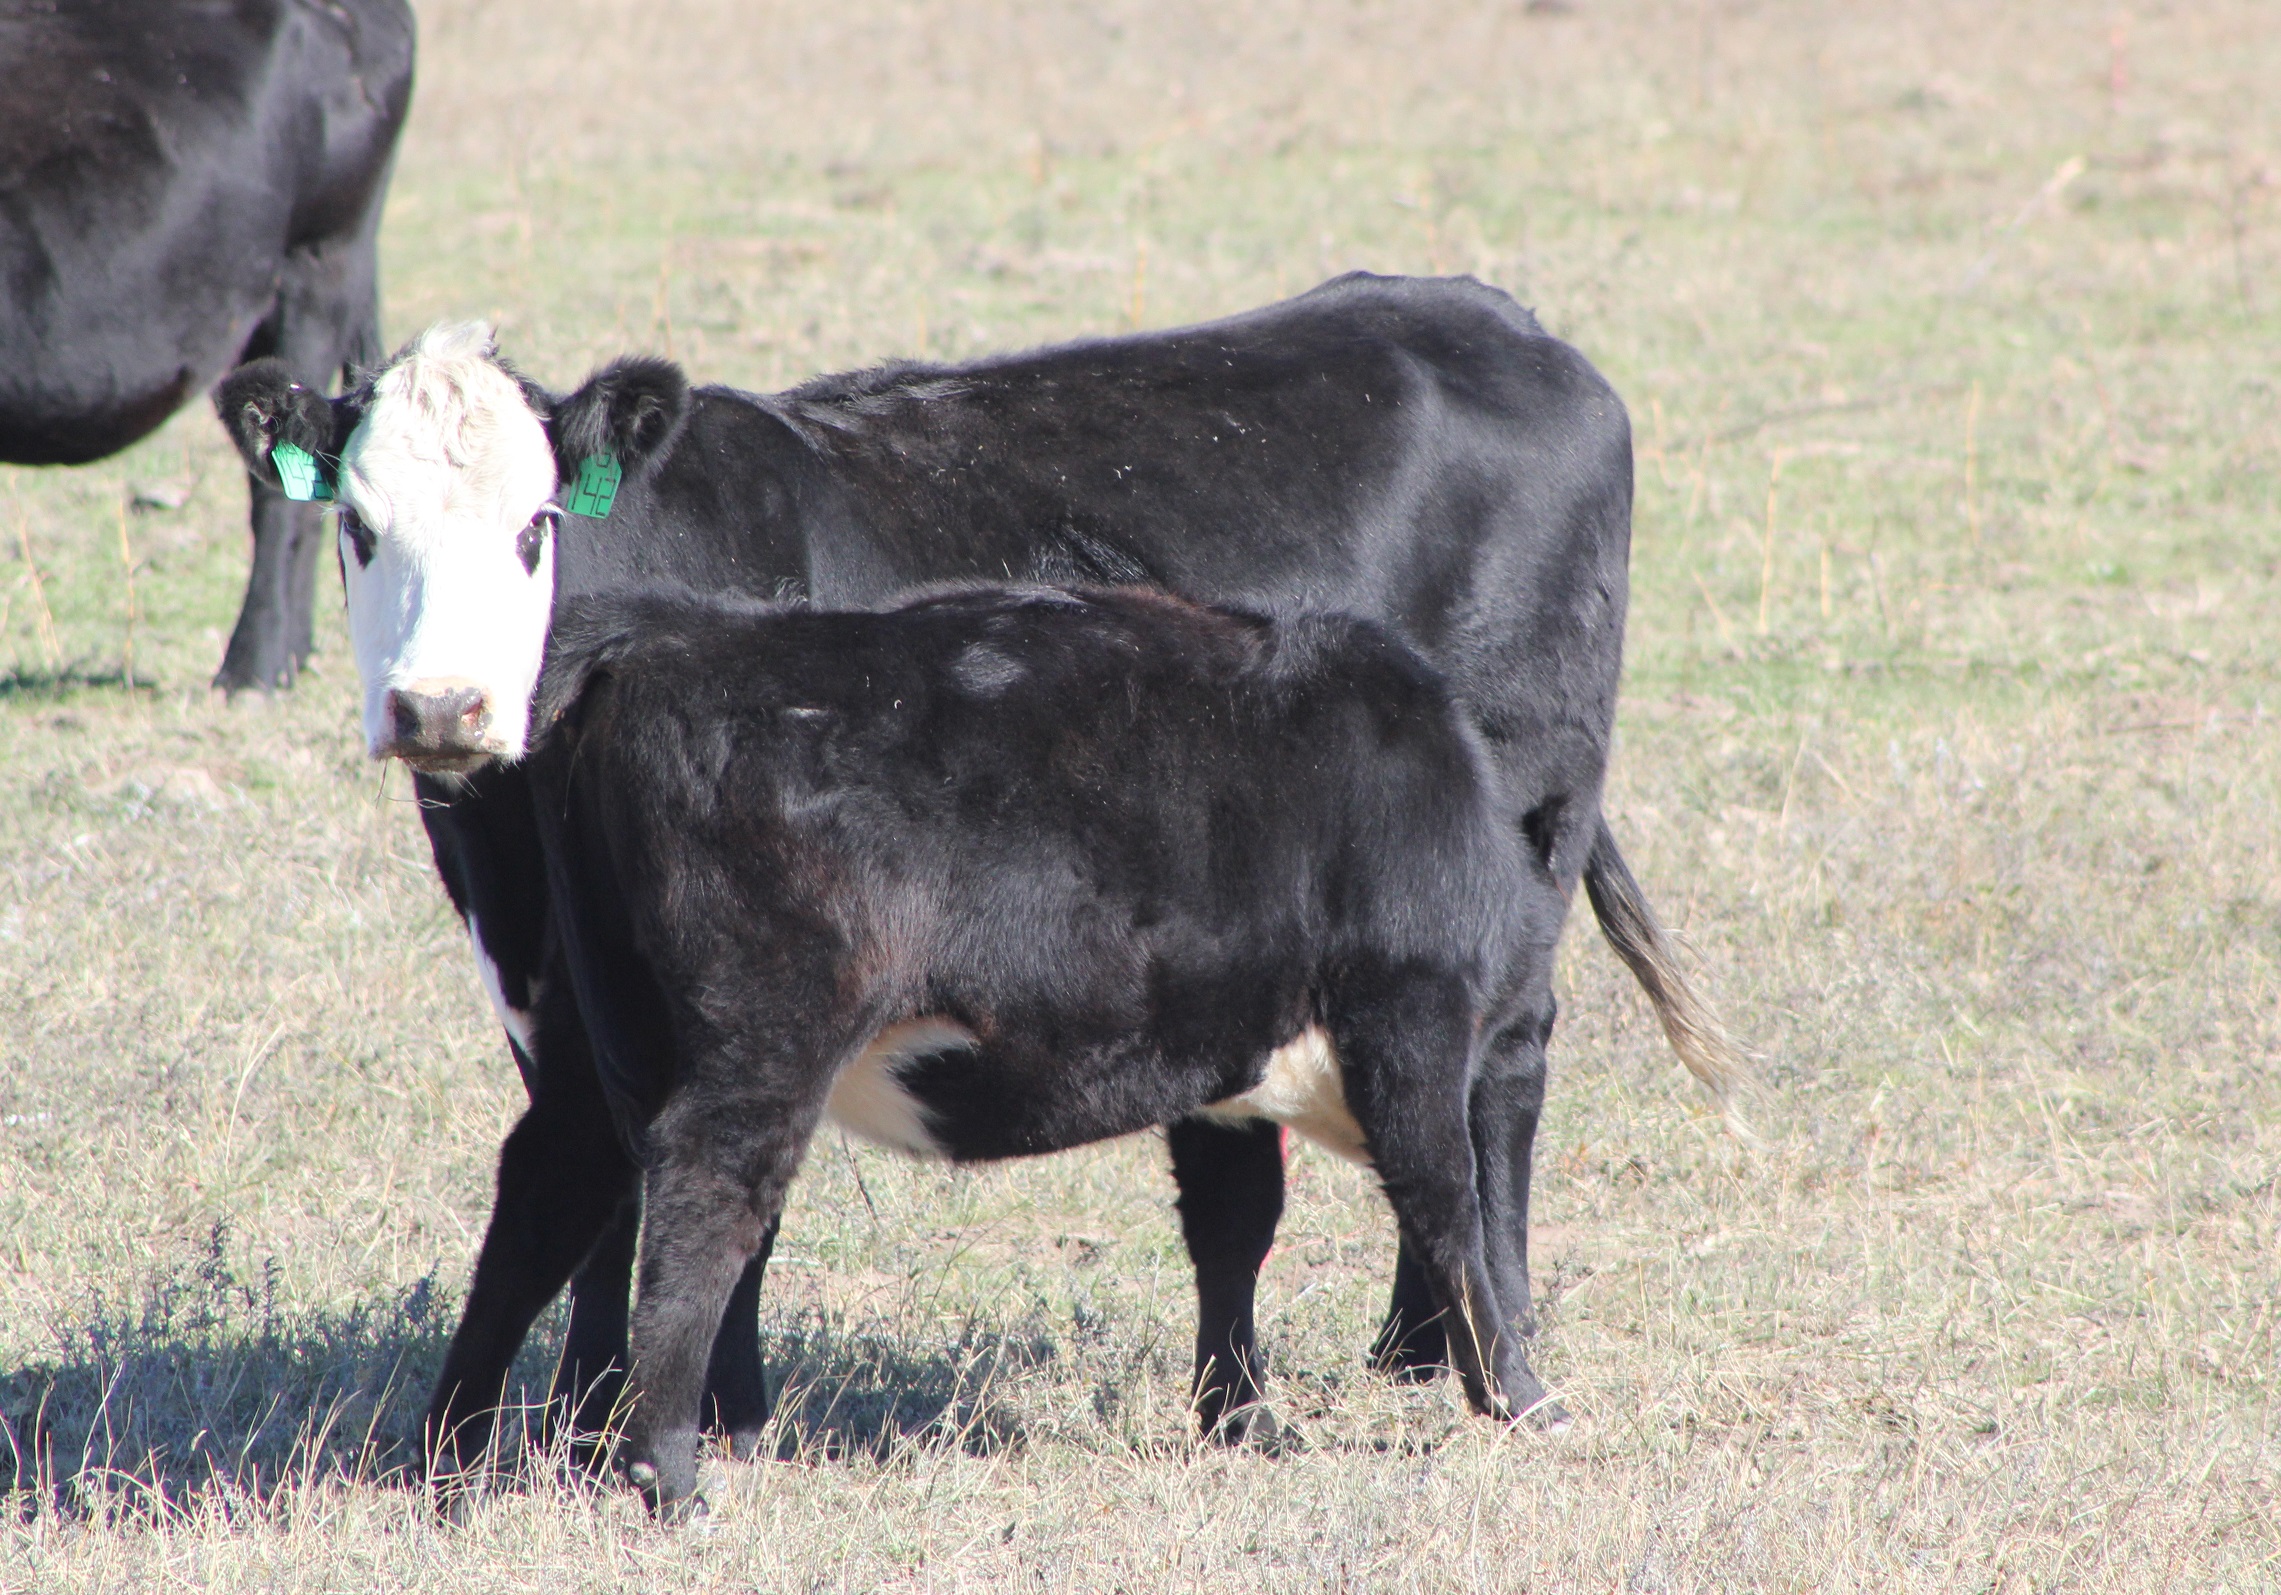 Cow-calf producers have EPDs and index tools to make genetic selection decisions related to traits that impact levels of productivity and longevity. Photo courtesy of Troy Walz.